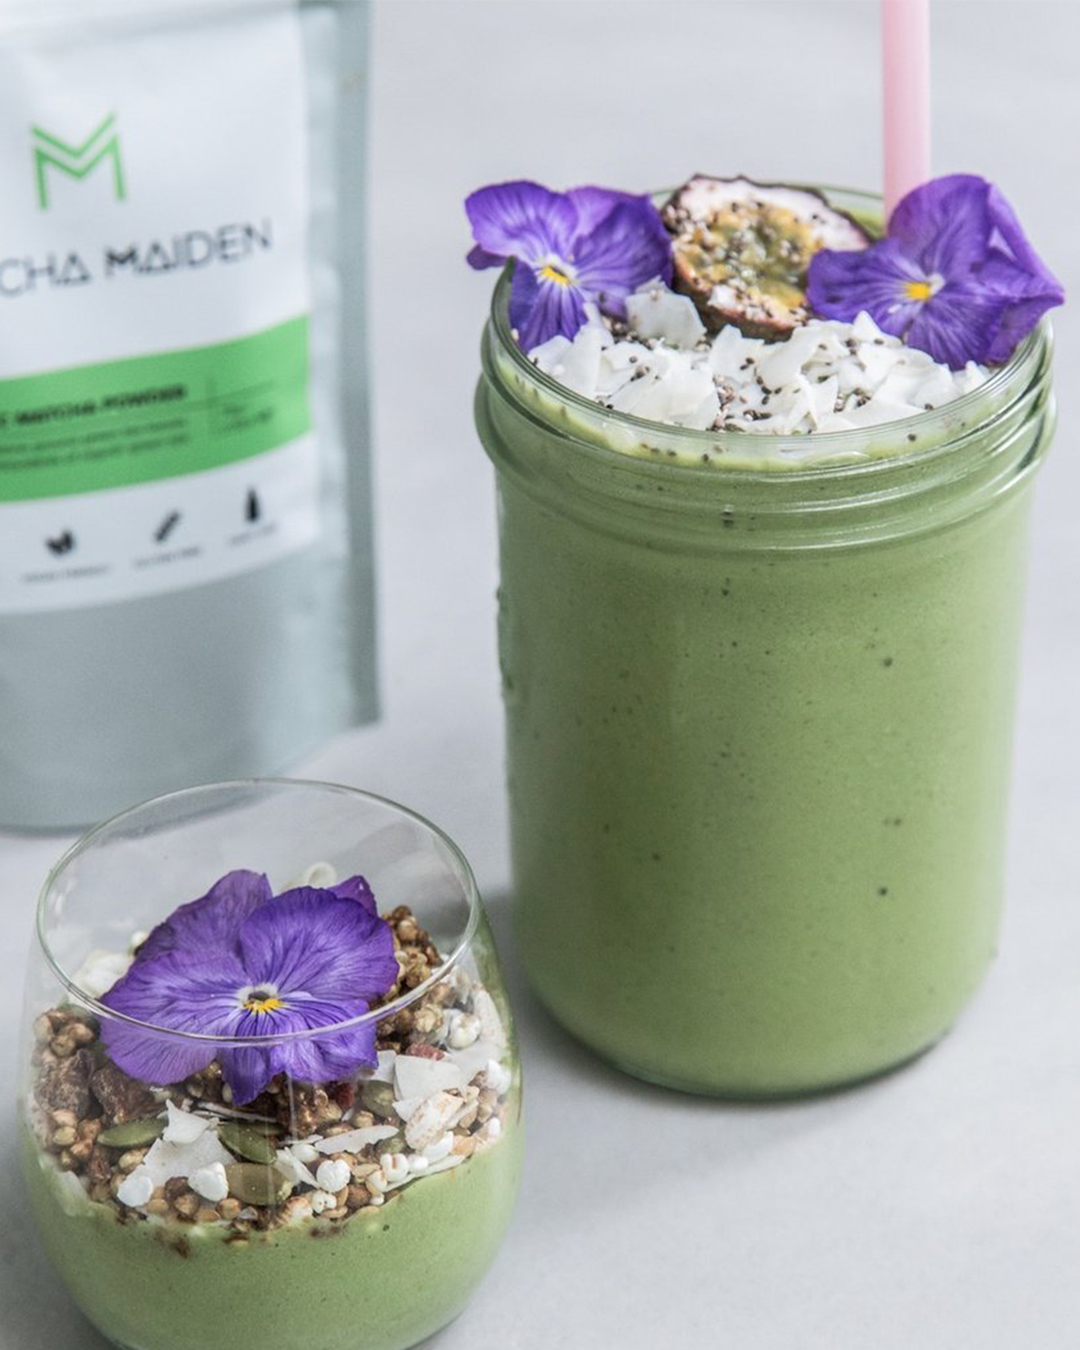 Matcha Maiden pouch with two matcha smoothies